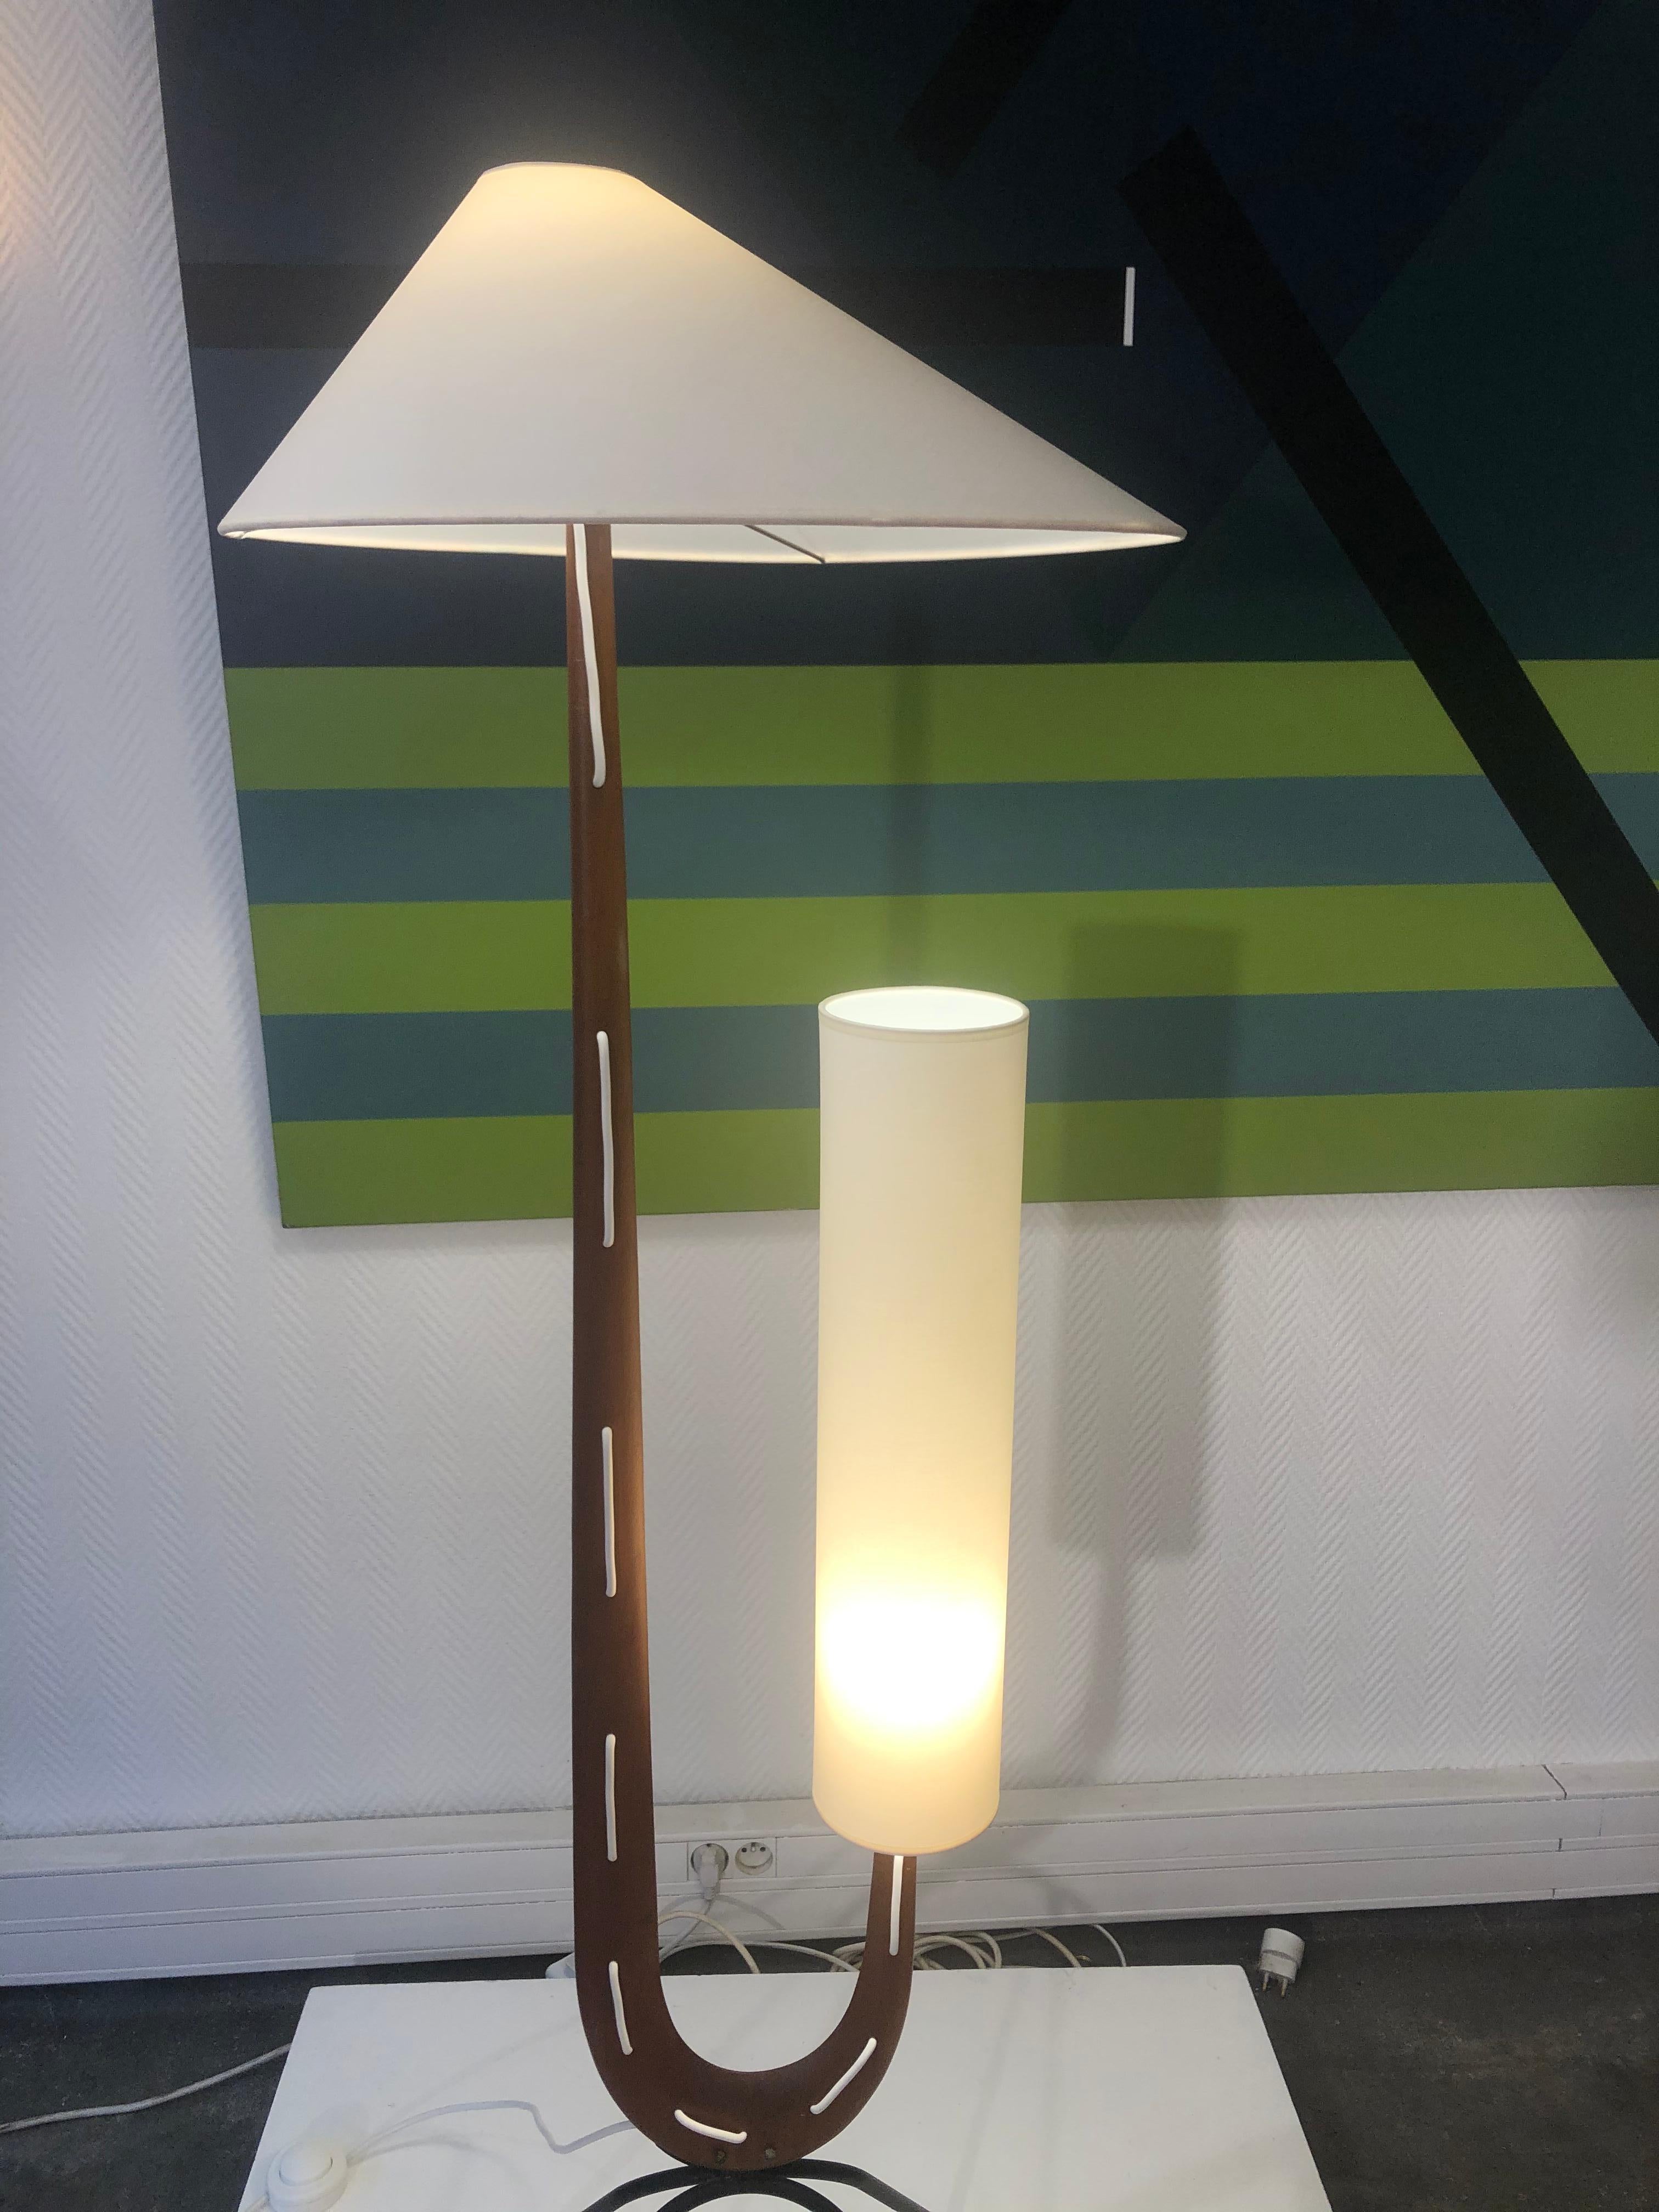 Giraffe floor lamp vintage by Maison Rispal
Teakwood from 1960
Excellent conditions.